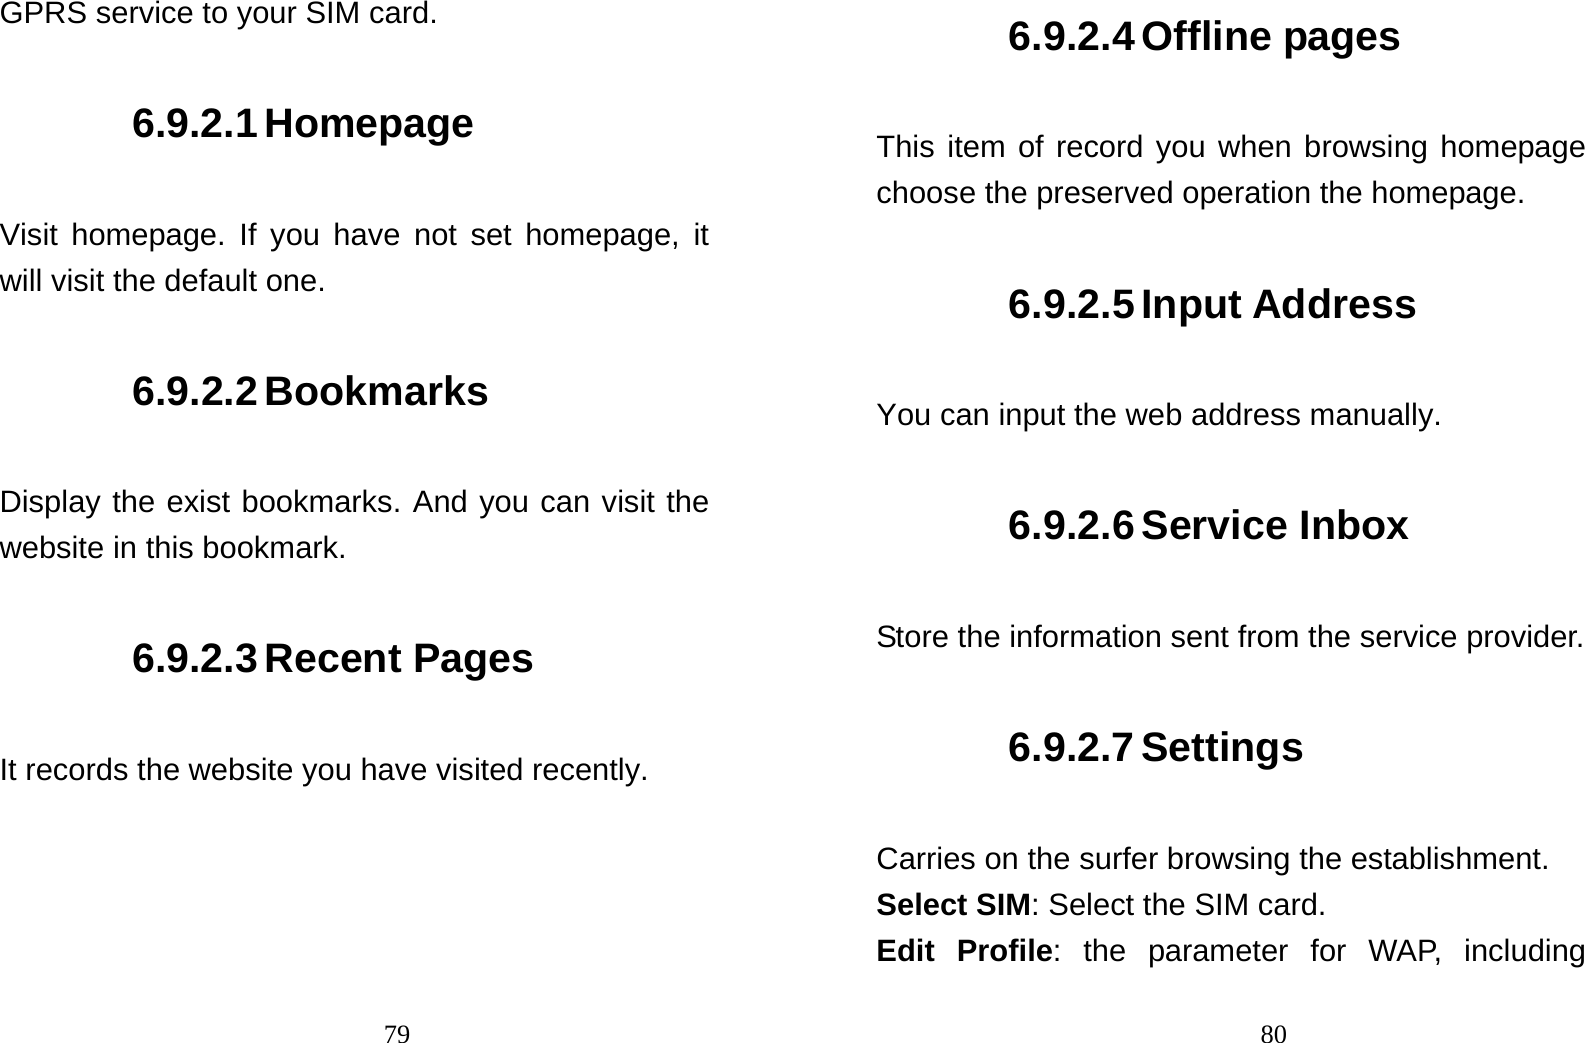                                79GPRS service to your SIM card. 6.9.2.1 Homepage Visit homepage. If you have not set homepage, it will visit the default one. 6.9.2.2 Bookmarks Display the exist bookmarks. And you can visit the website in this bookmark. 6.9.2.3 Recent Pages It records the website you have visited recently.                                806.9.2.4 Offline pages This item of record you when browsing homepage choose the preserved operation the homepage. 6.9.2.5 Input Address You can input the web address manually. 6.9.2.6 Service Inbox Store the information sent from the service provider. 6.9.2.7 Settings Carries on the surfer browsing the establishment. Select SIM: Select the SIM card. Edit Profile: the parameter for WAP, including 